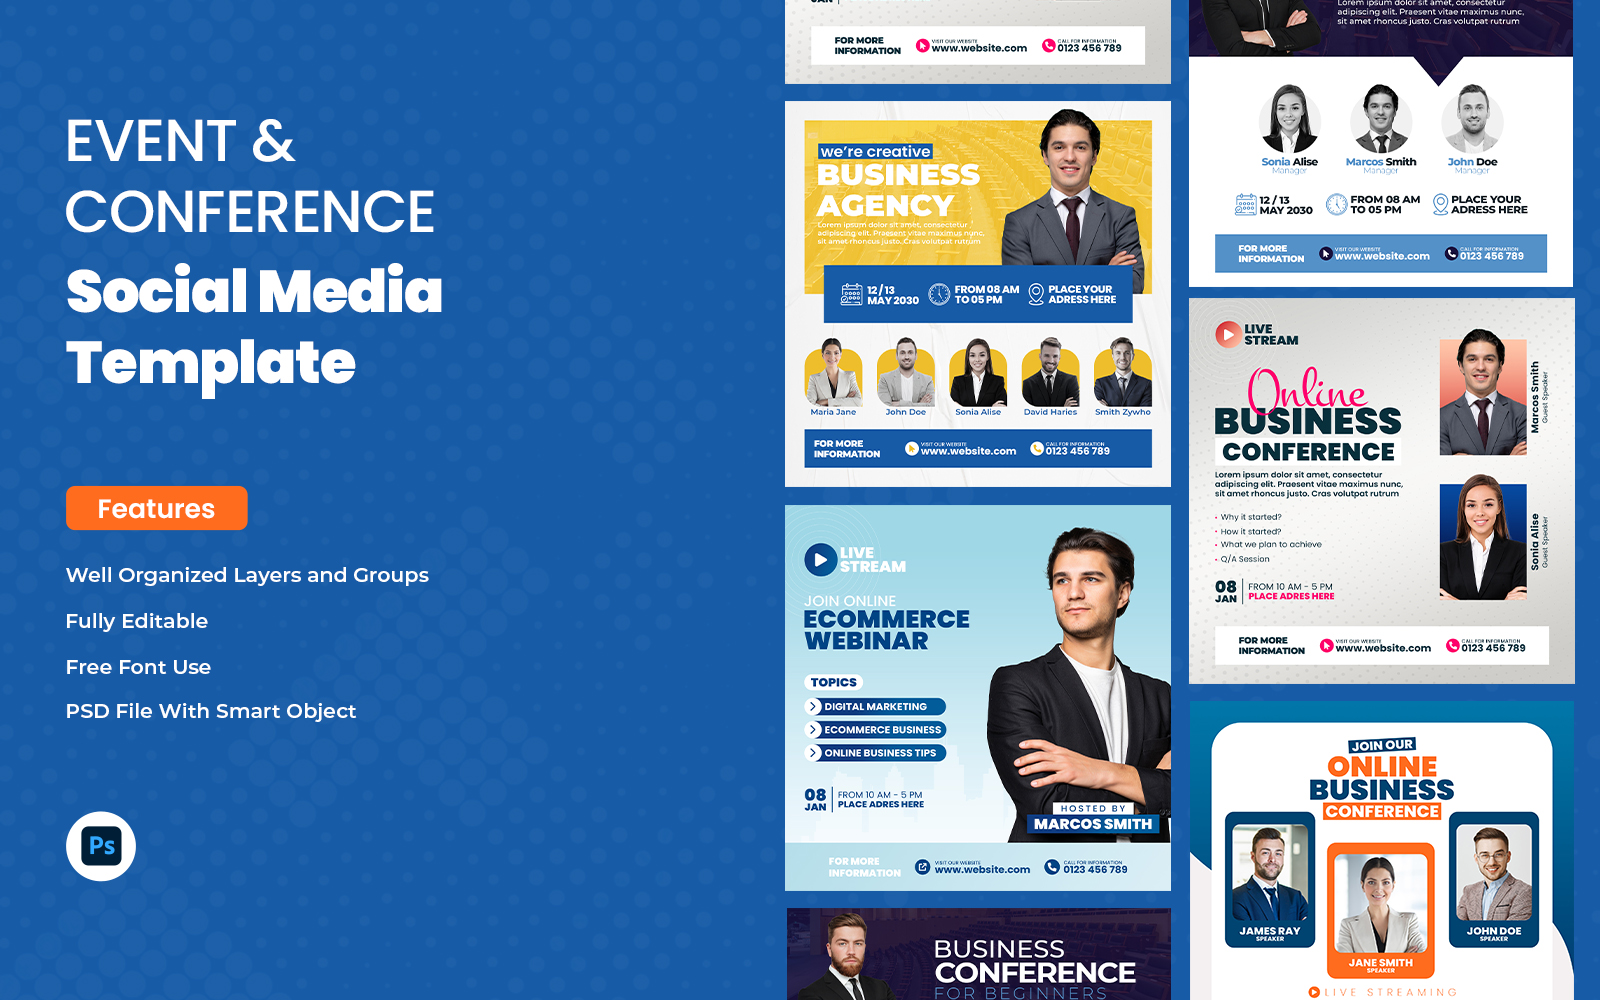 Event & Conference Social Media Template